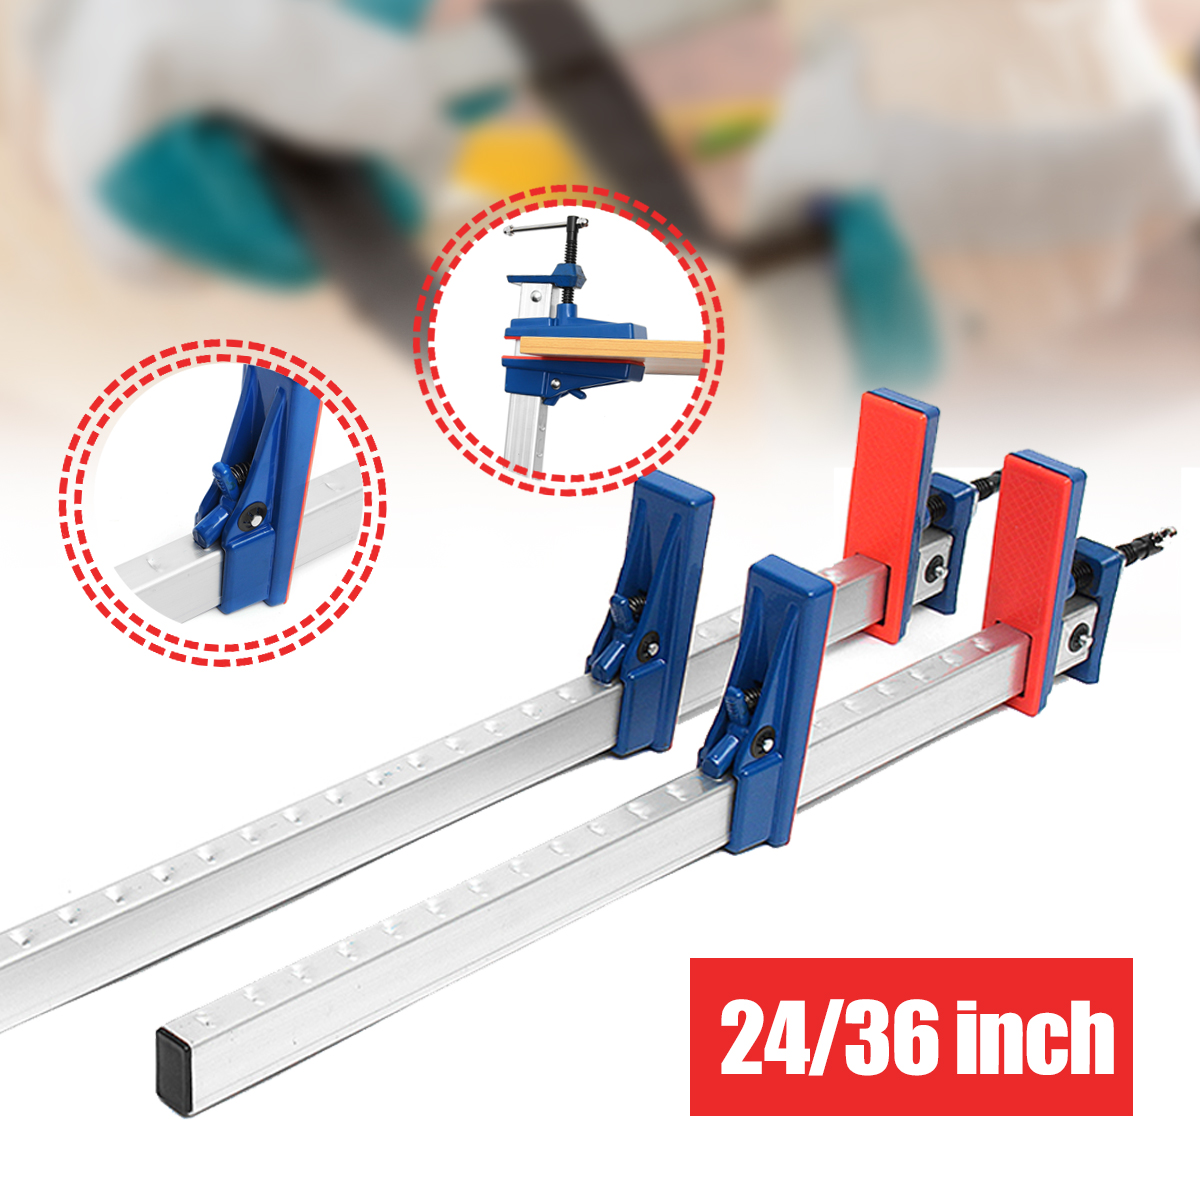 2436-Inch-Aluminum-Alloy-F-Clamp-Bar-Quick-Release-Woodworking-Clamp-Parallel-Adjustable-Heavy-Duty--1361735-1